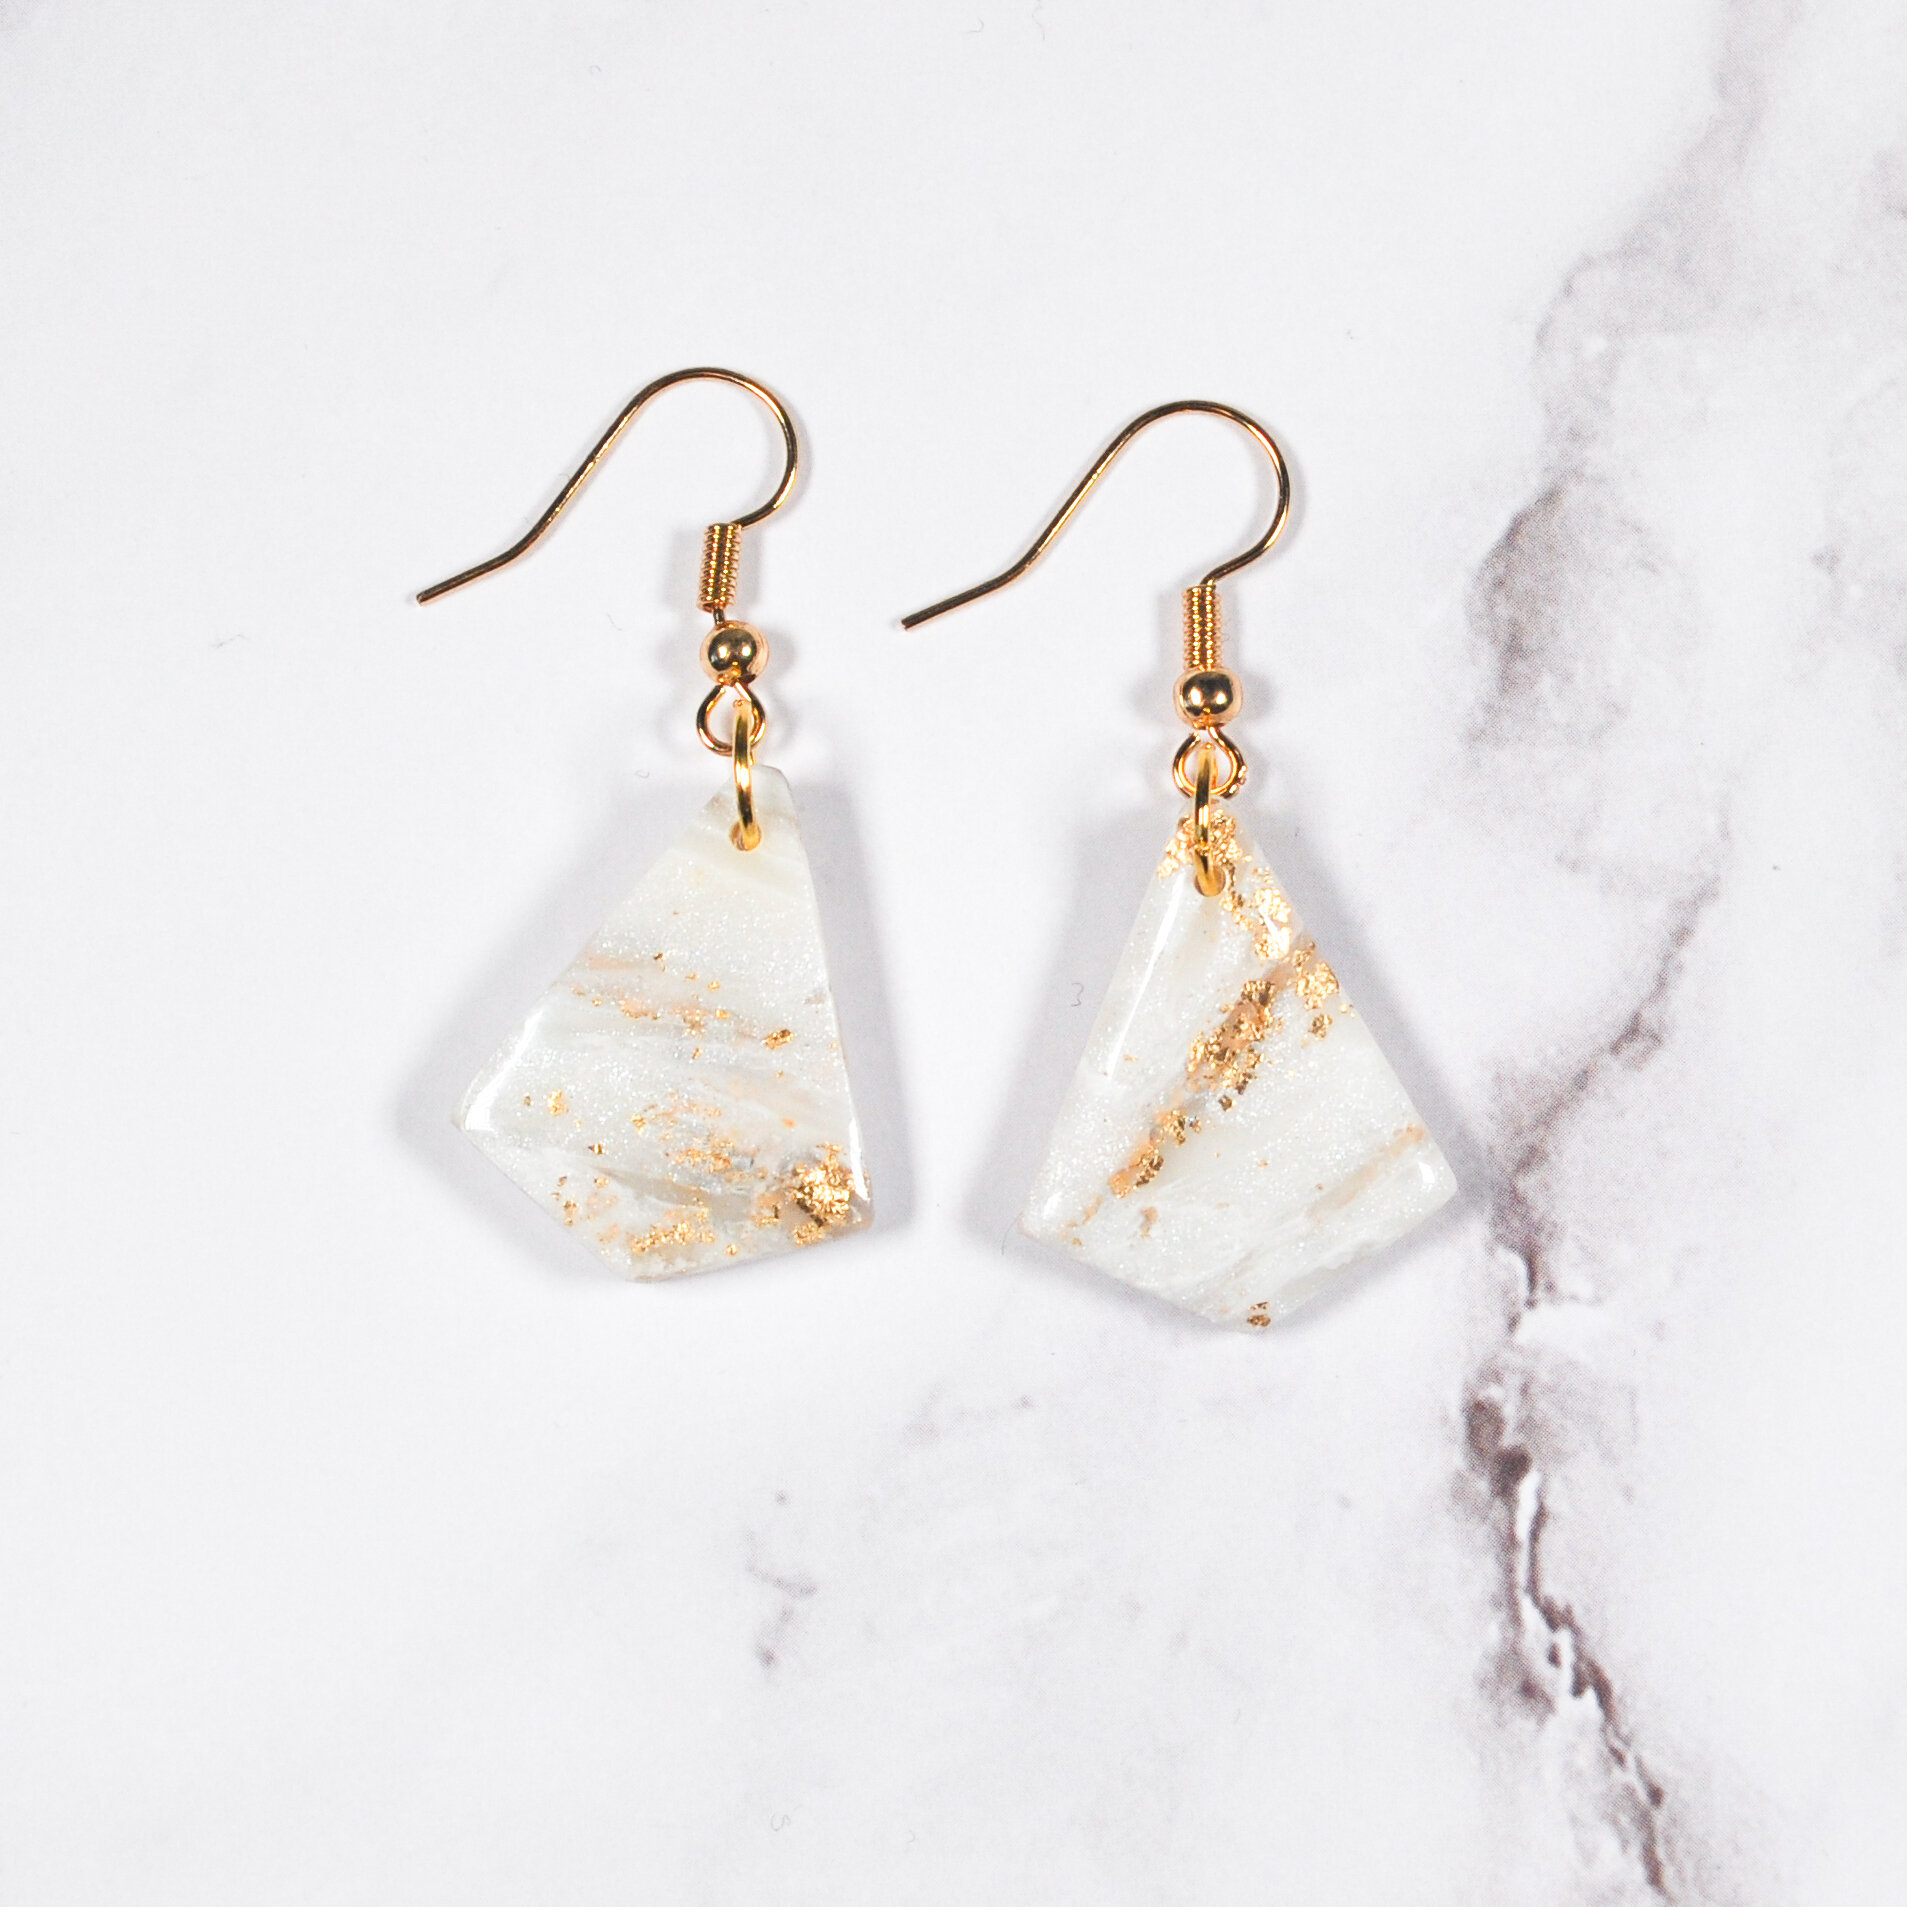 White translucent marbled earrings polymer clay